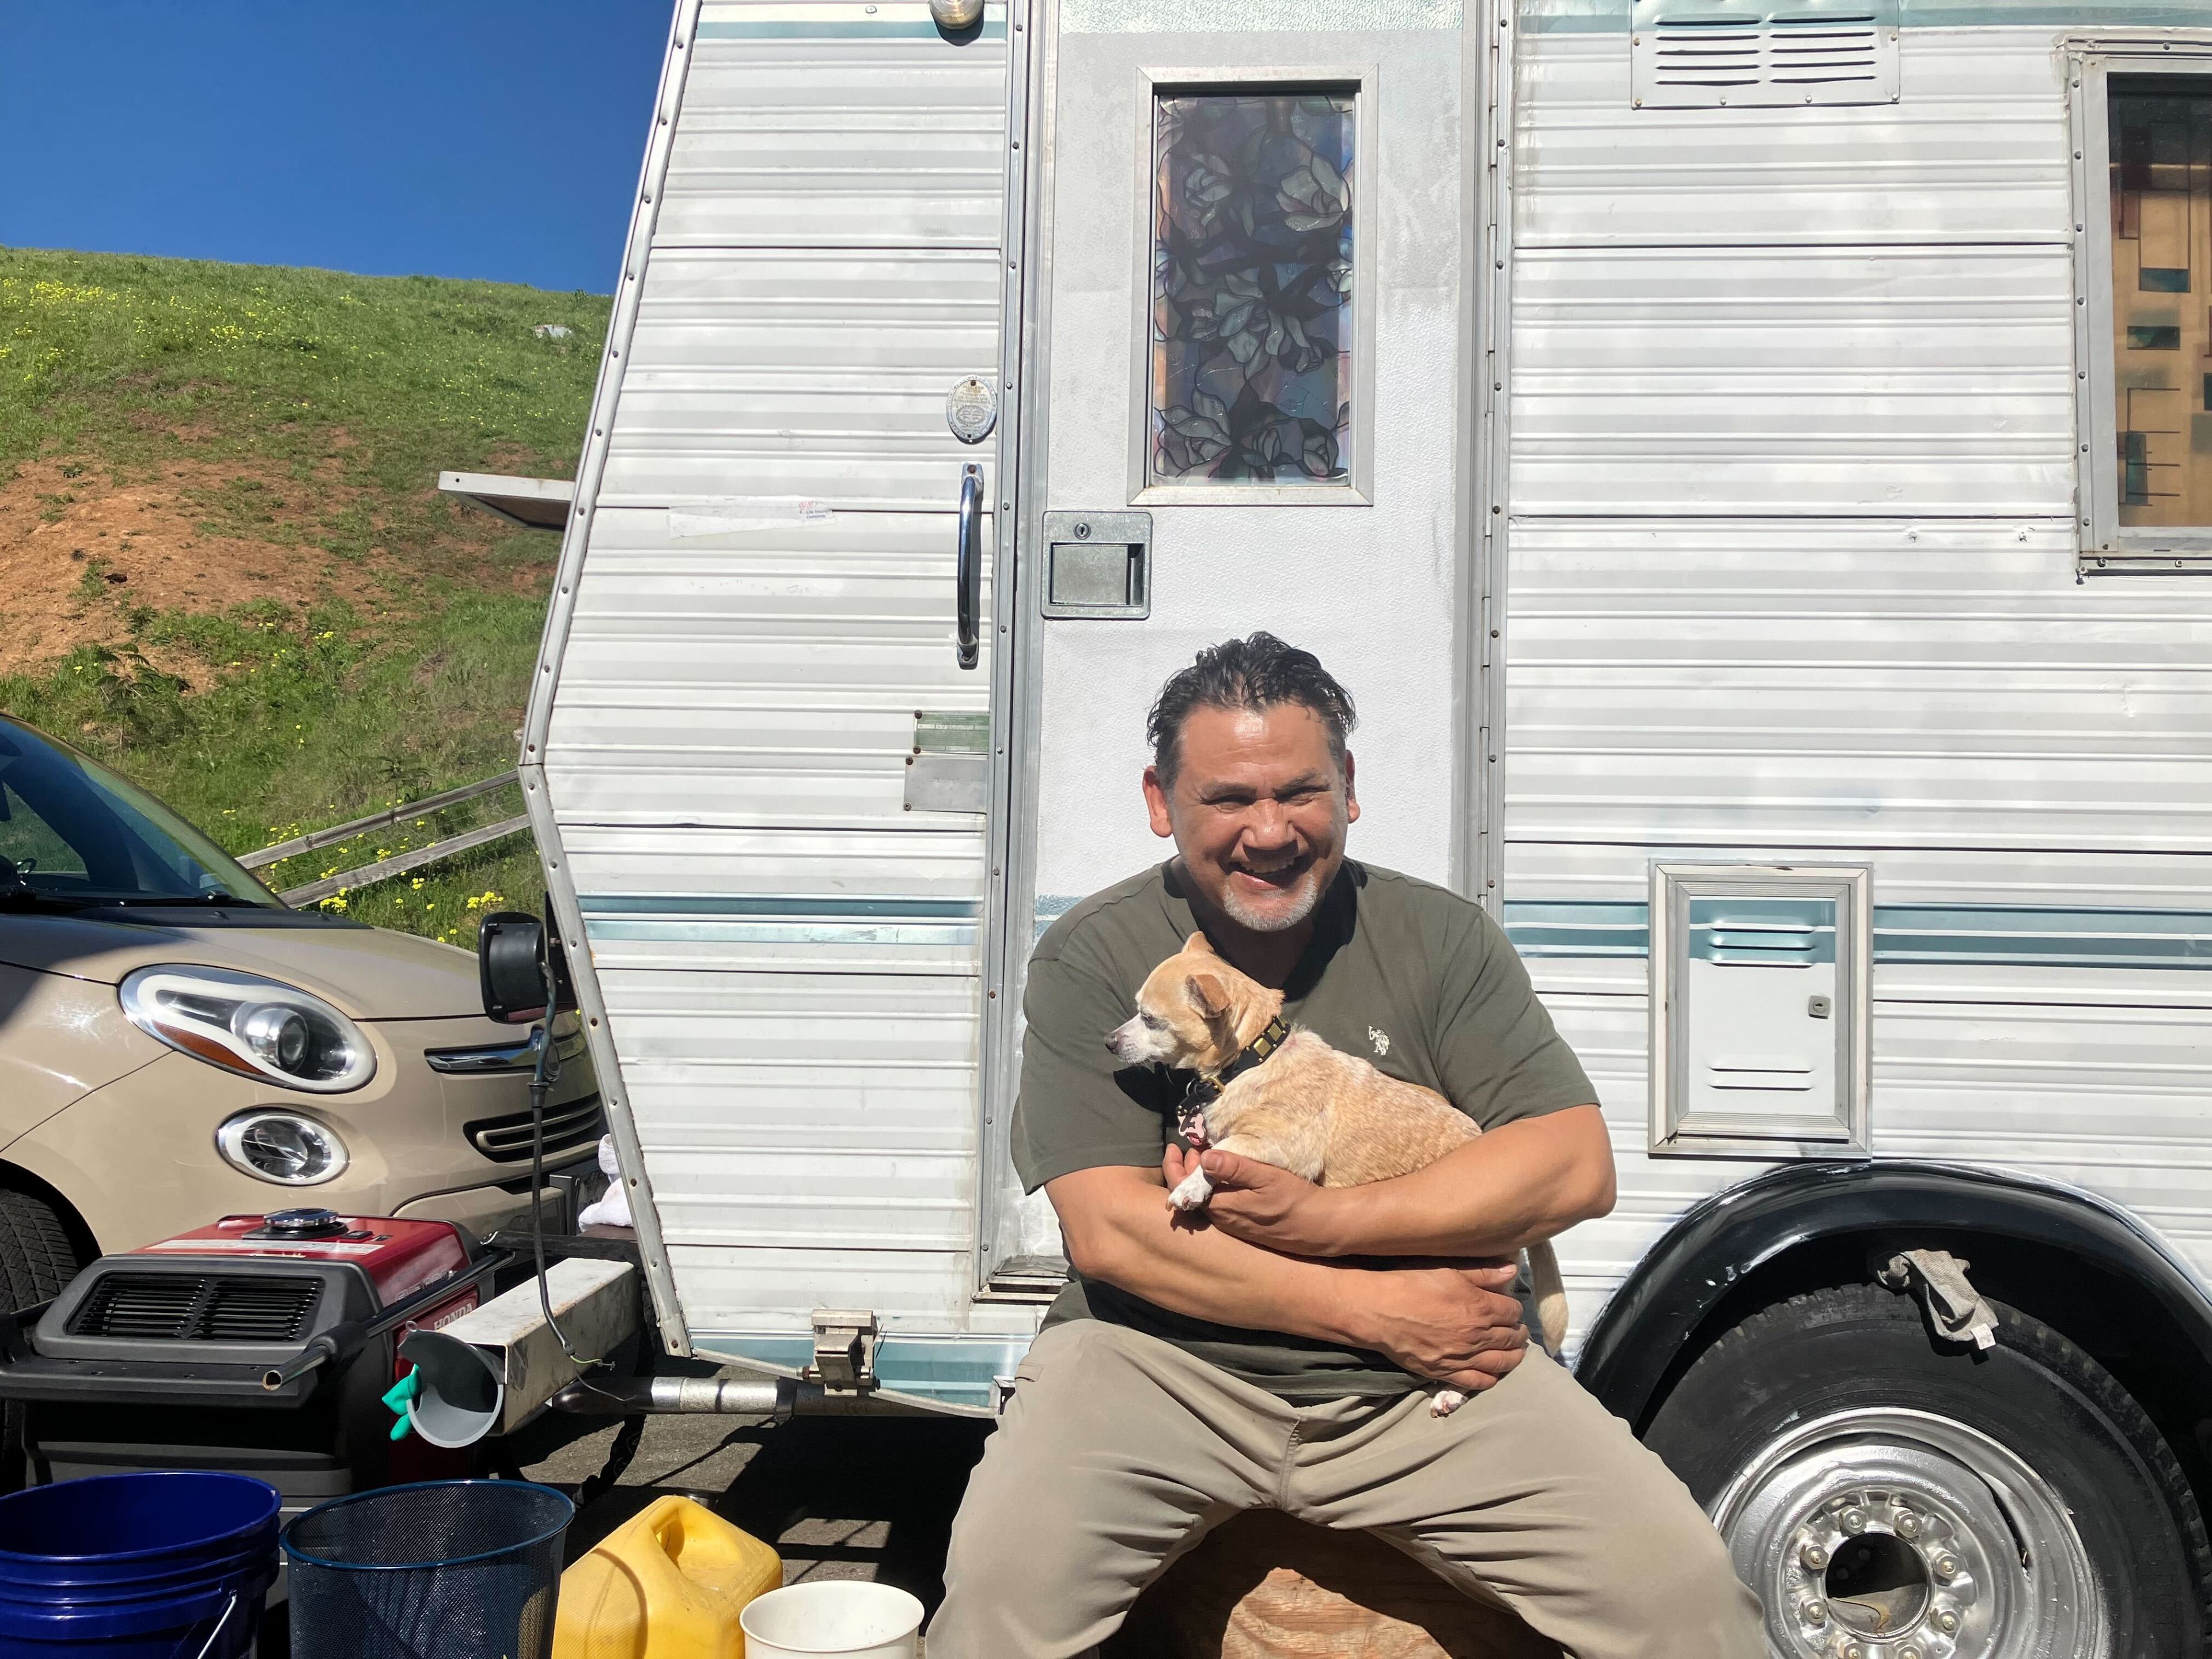 A smiling person sits beside an RV, holding a small dog, with a car and green hill in the background.